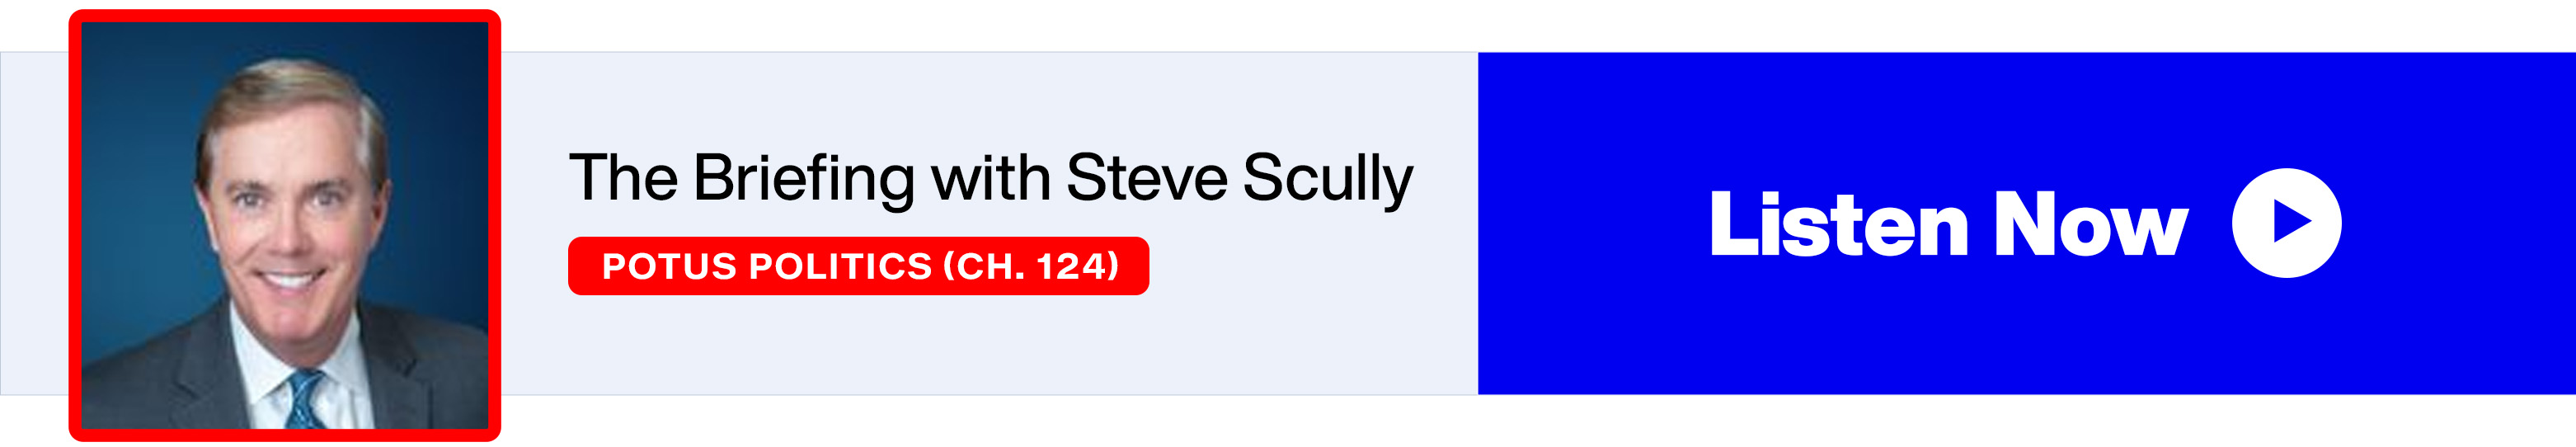 The Briefing with Steve Scully - SiriusXM POTUS Politics (Ch. 124) - Listen Now banner